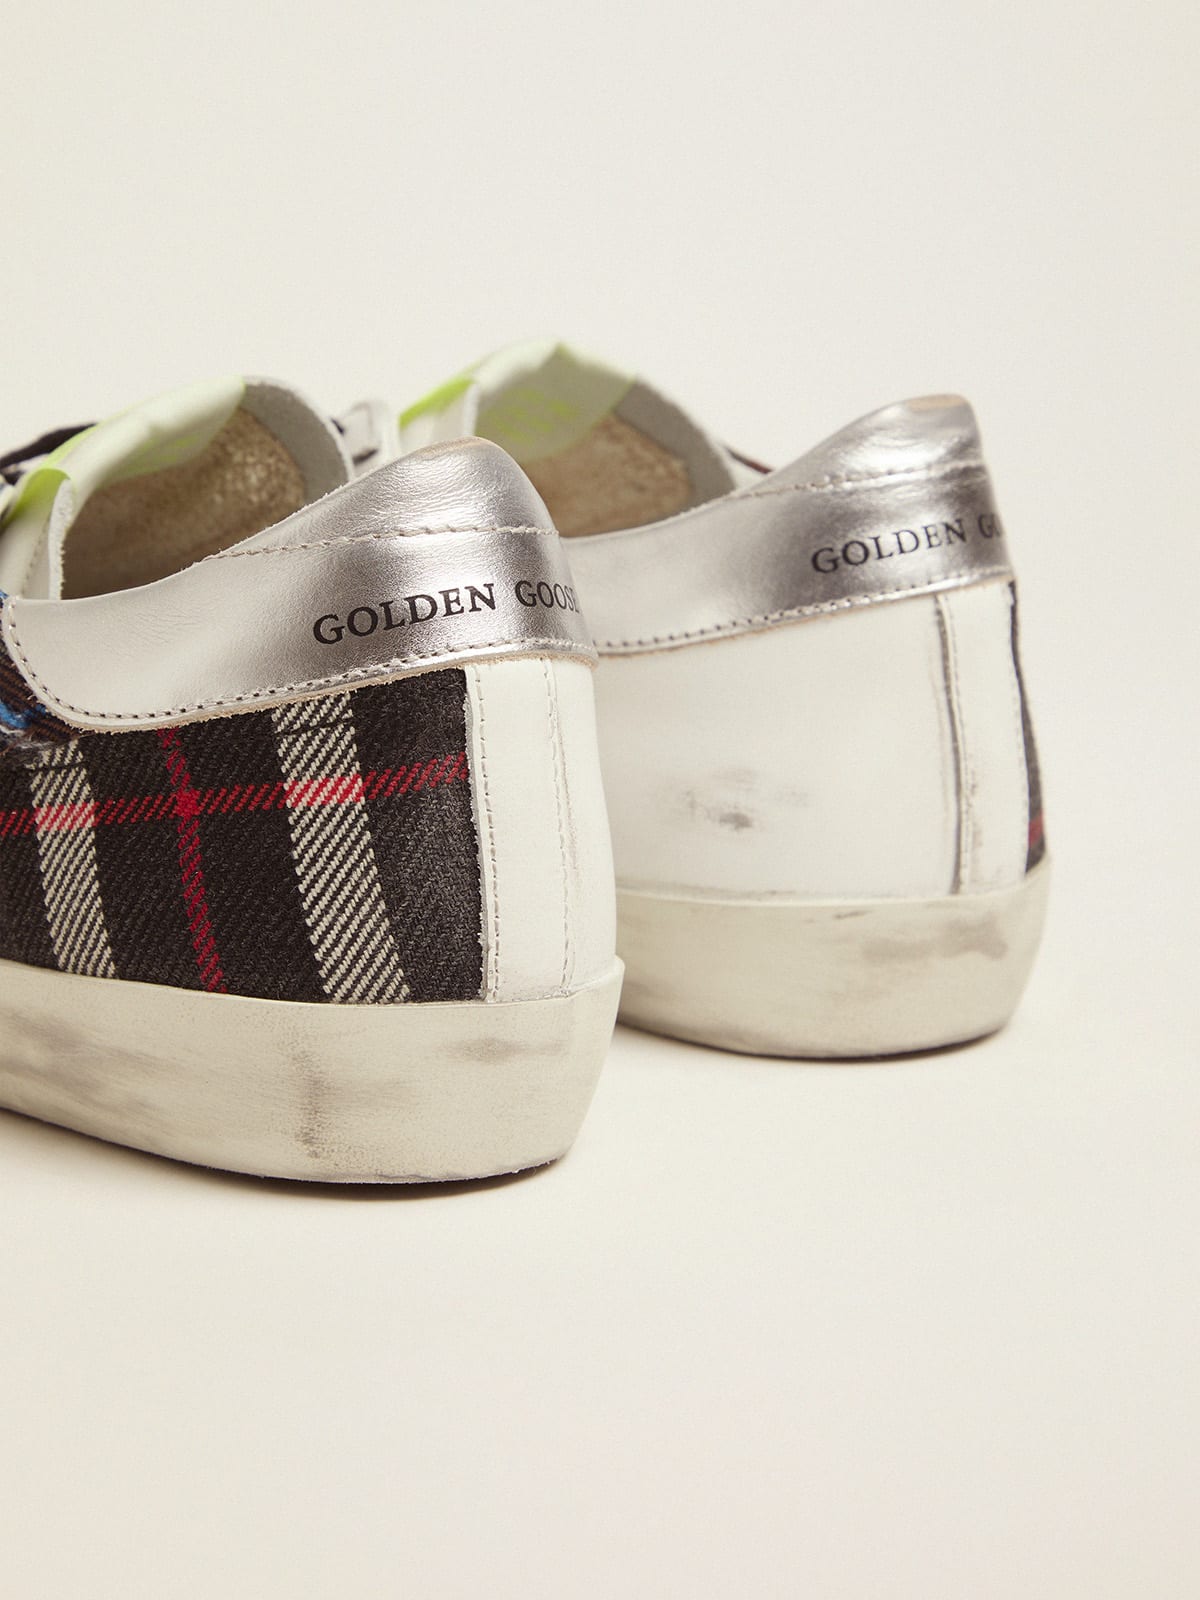 Golden Goose - Women's Limited Edition LAB white Super-Star sneakers with tartan insert in 